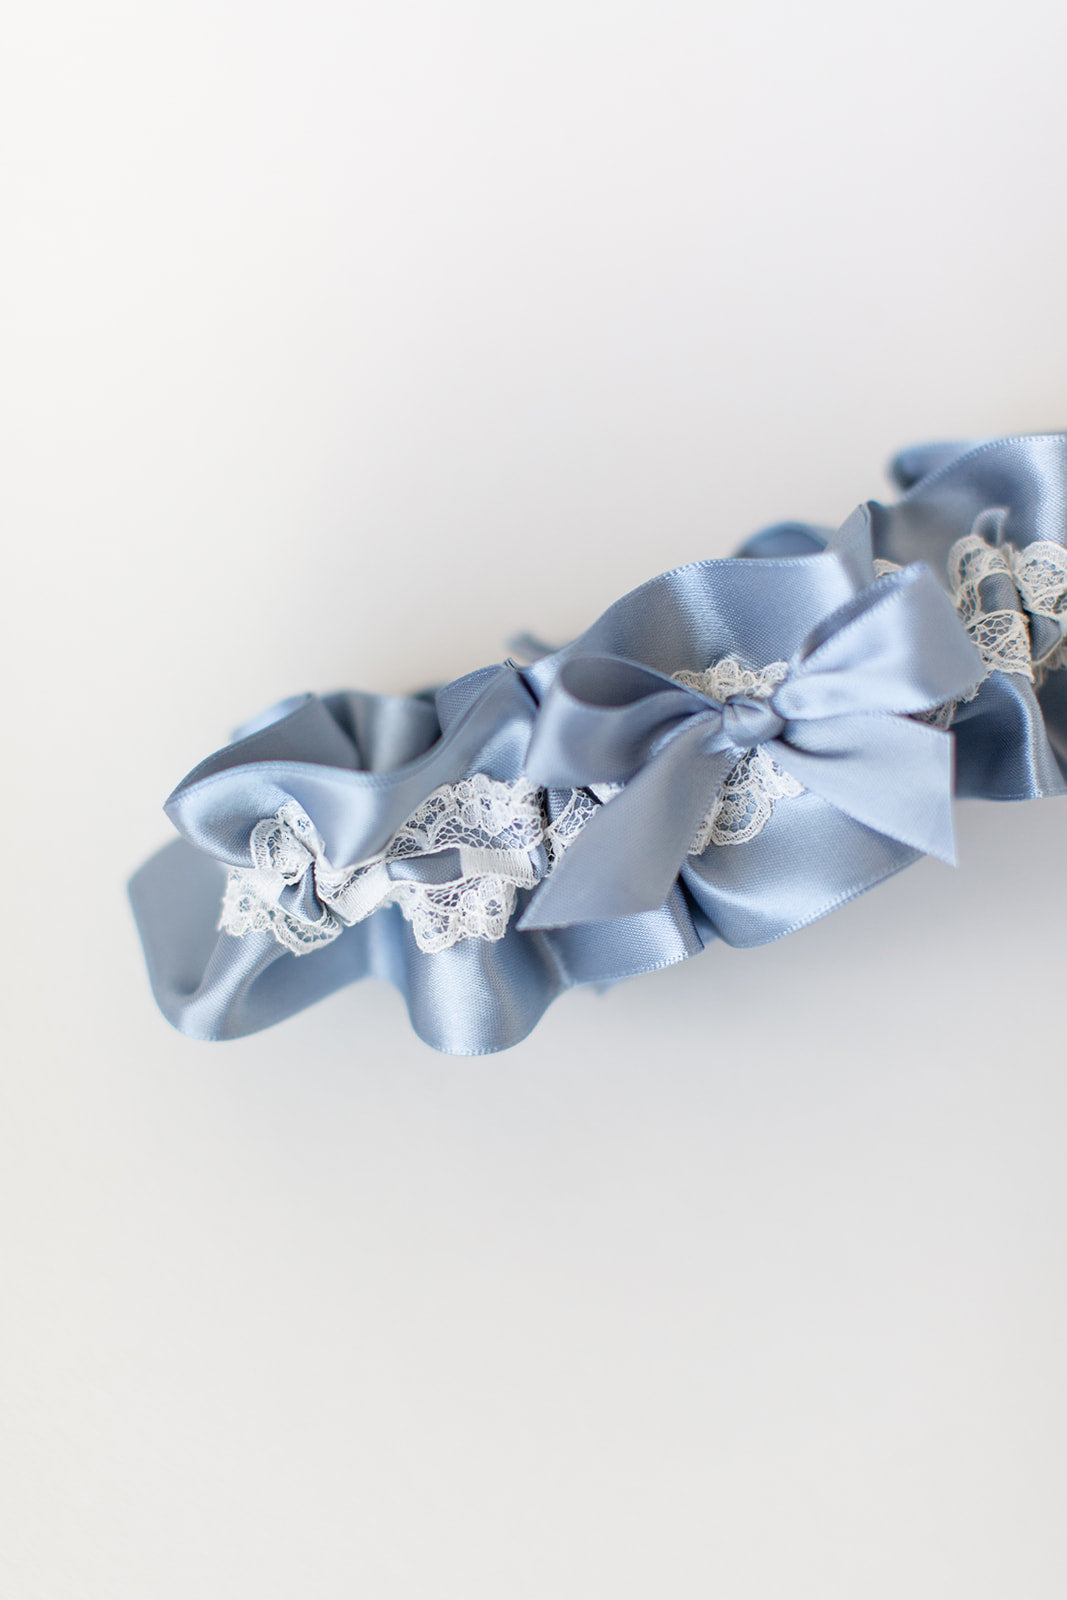 custom garter with dusty blue and ivory lace